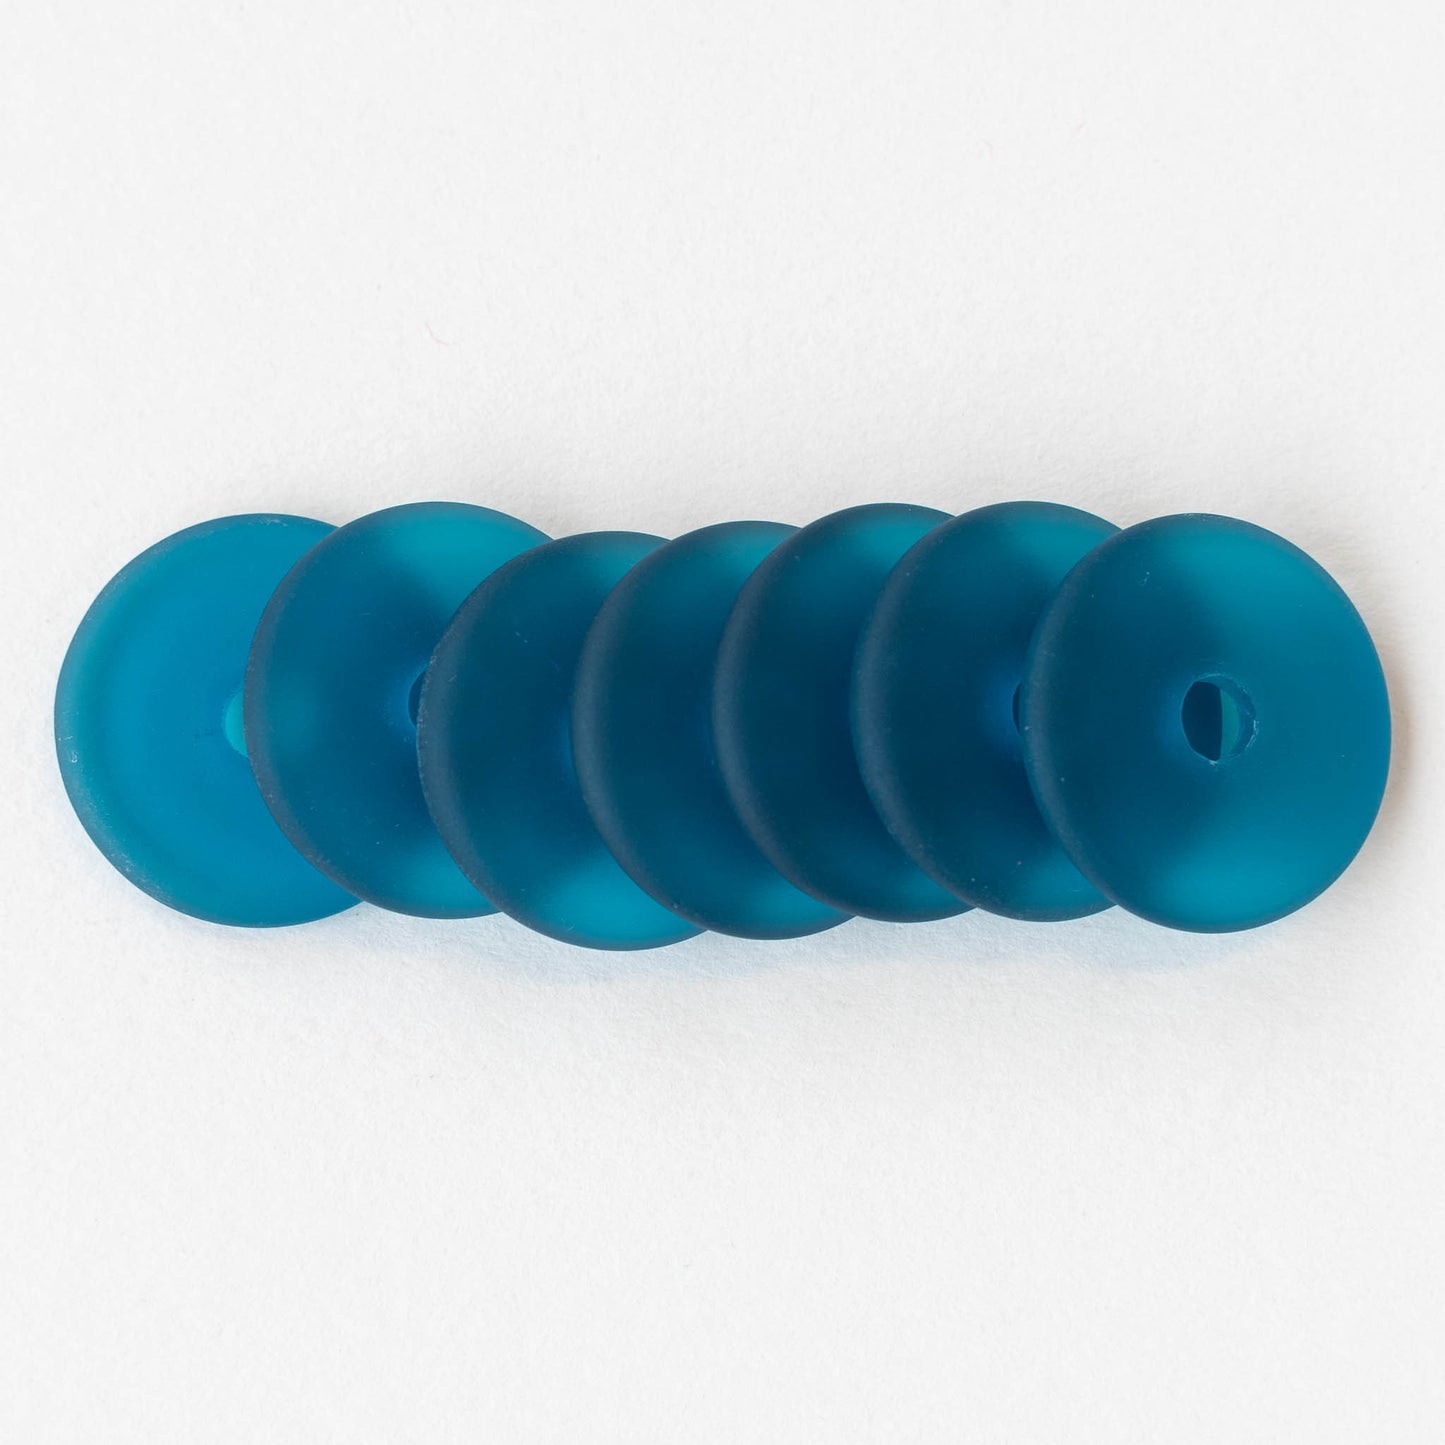 25mm Frosted Glass Donut - Teal - 4 Beads